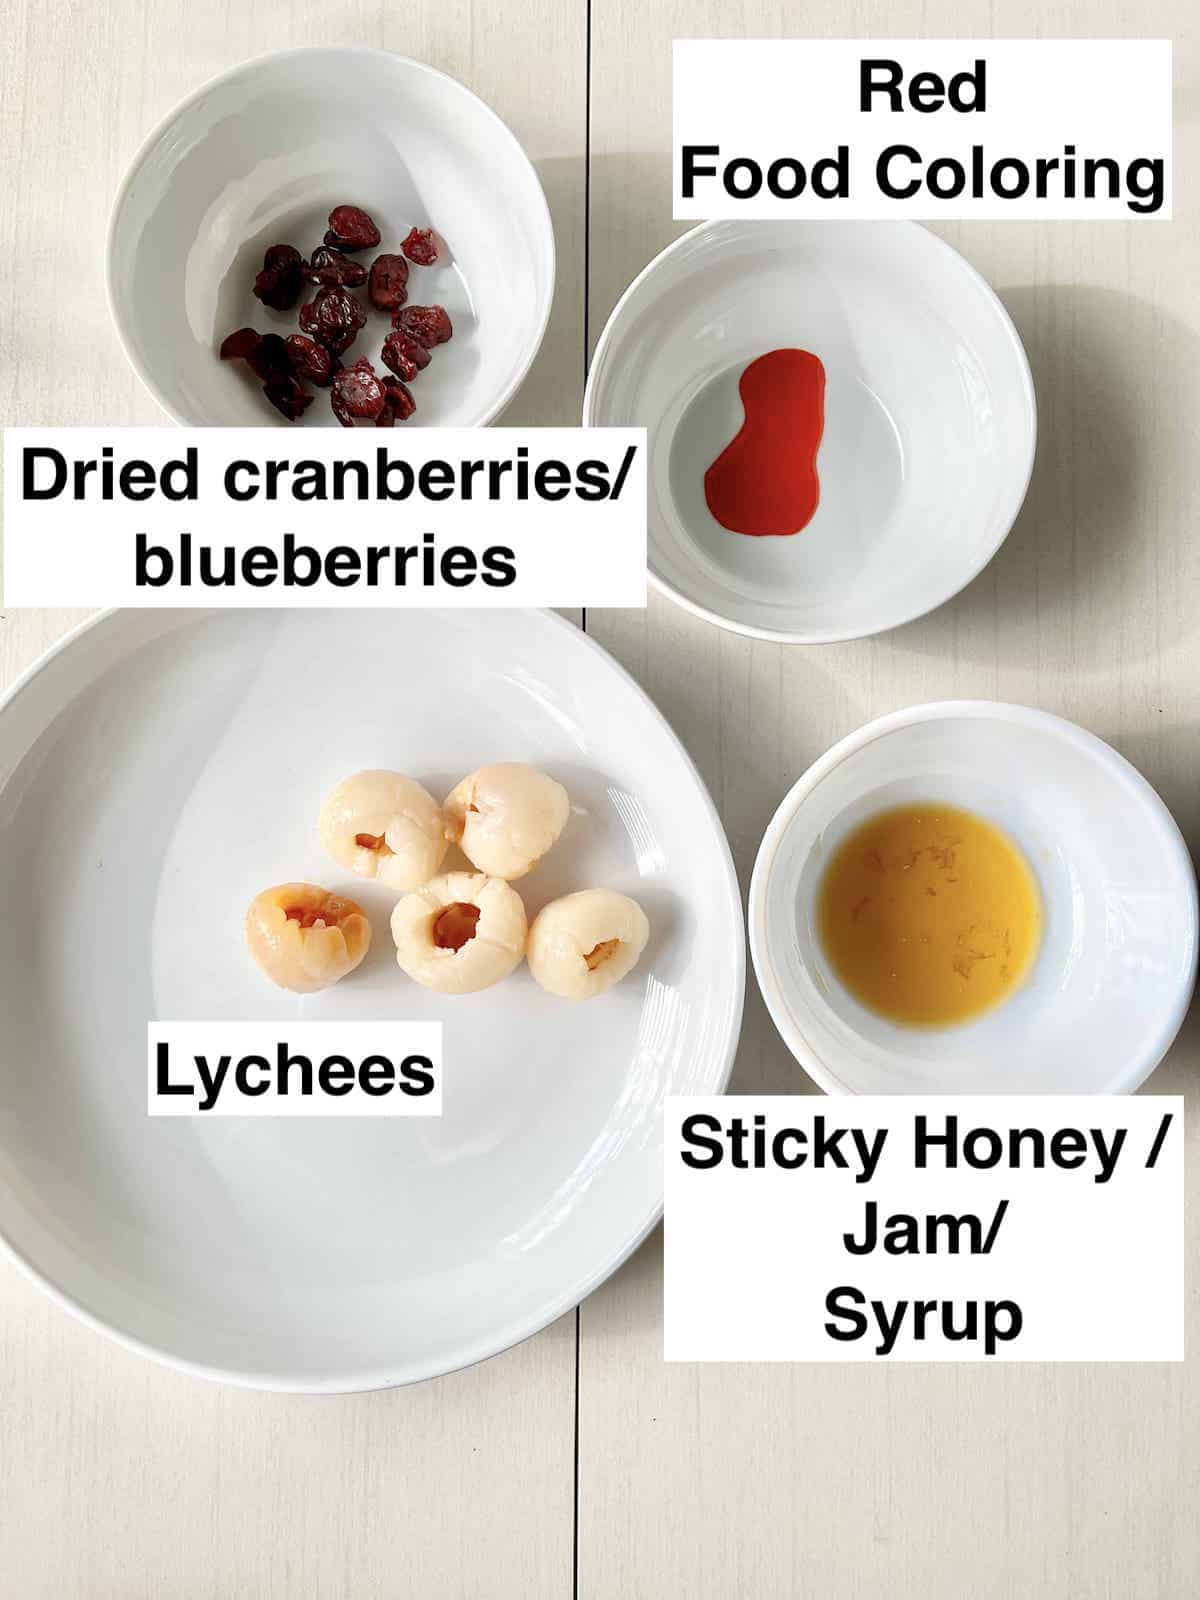 Lychees next to maple syrup, red food coloring and a bowl of dried cranberries.